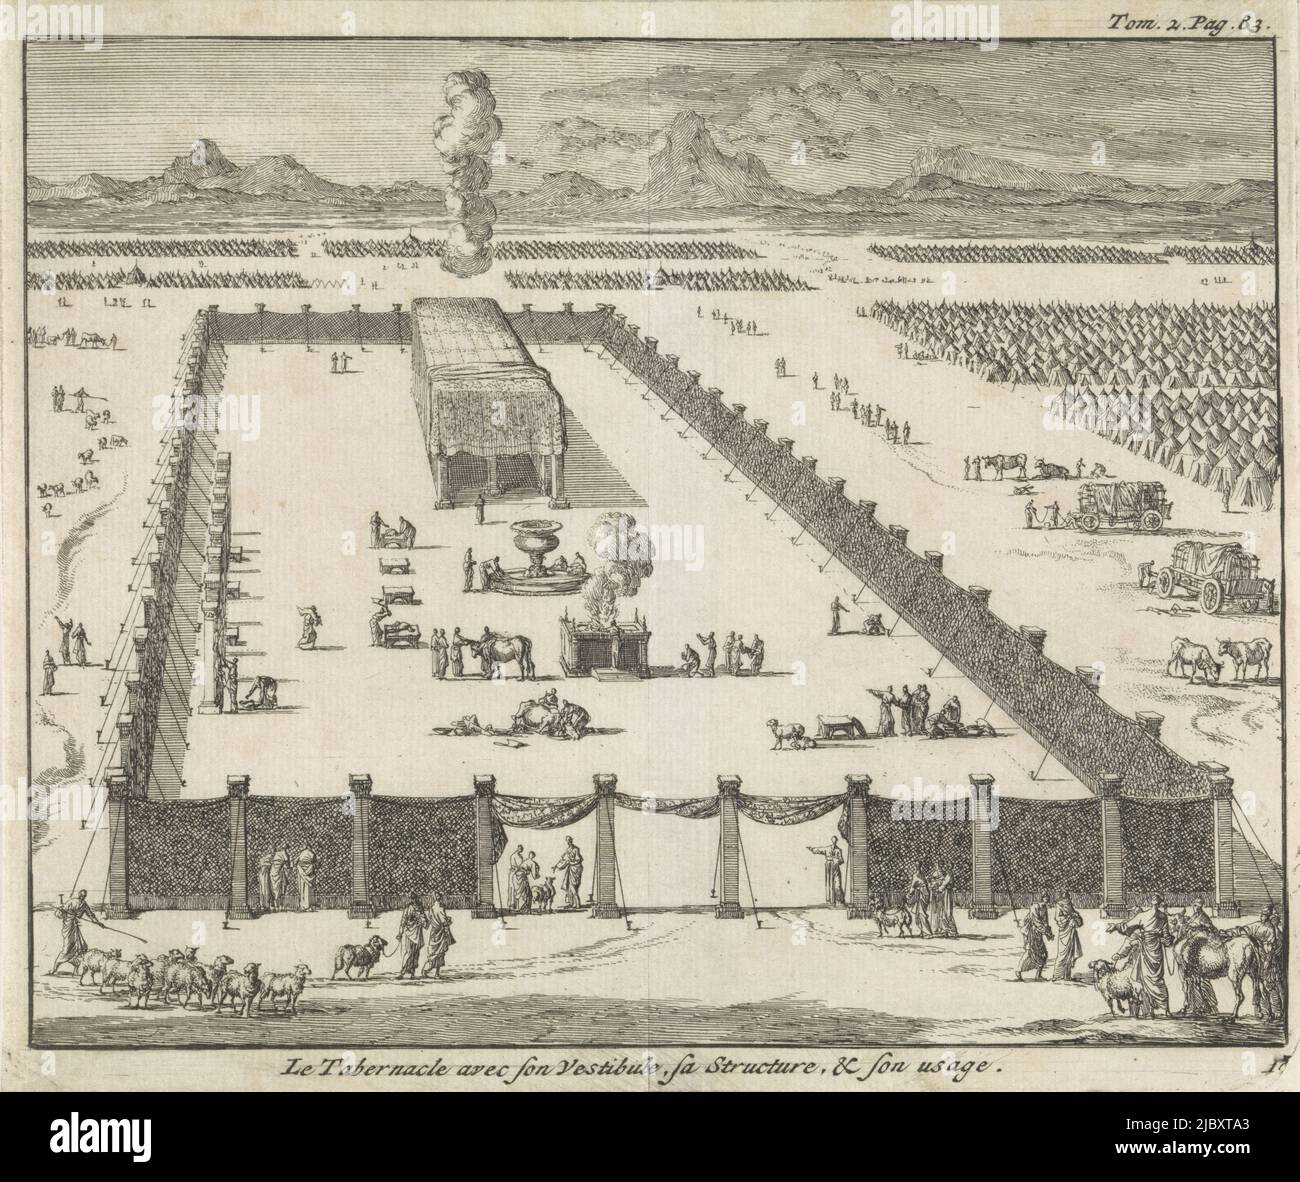 View of the forecourt and tabernacle Le Tabernacle avec son Vestibule, sa Structure, & son usage , print maker: Jan Luyken, publisher: Pieter Mortier (I), Amsterdam, 1705, paper, etching, h 146 mm × w 173 mm Stock Photo